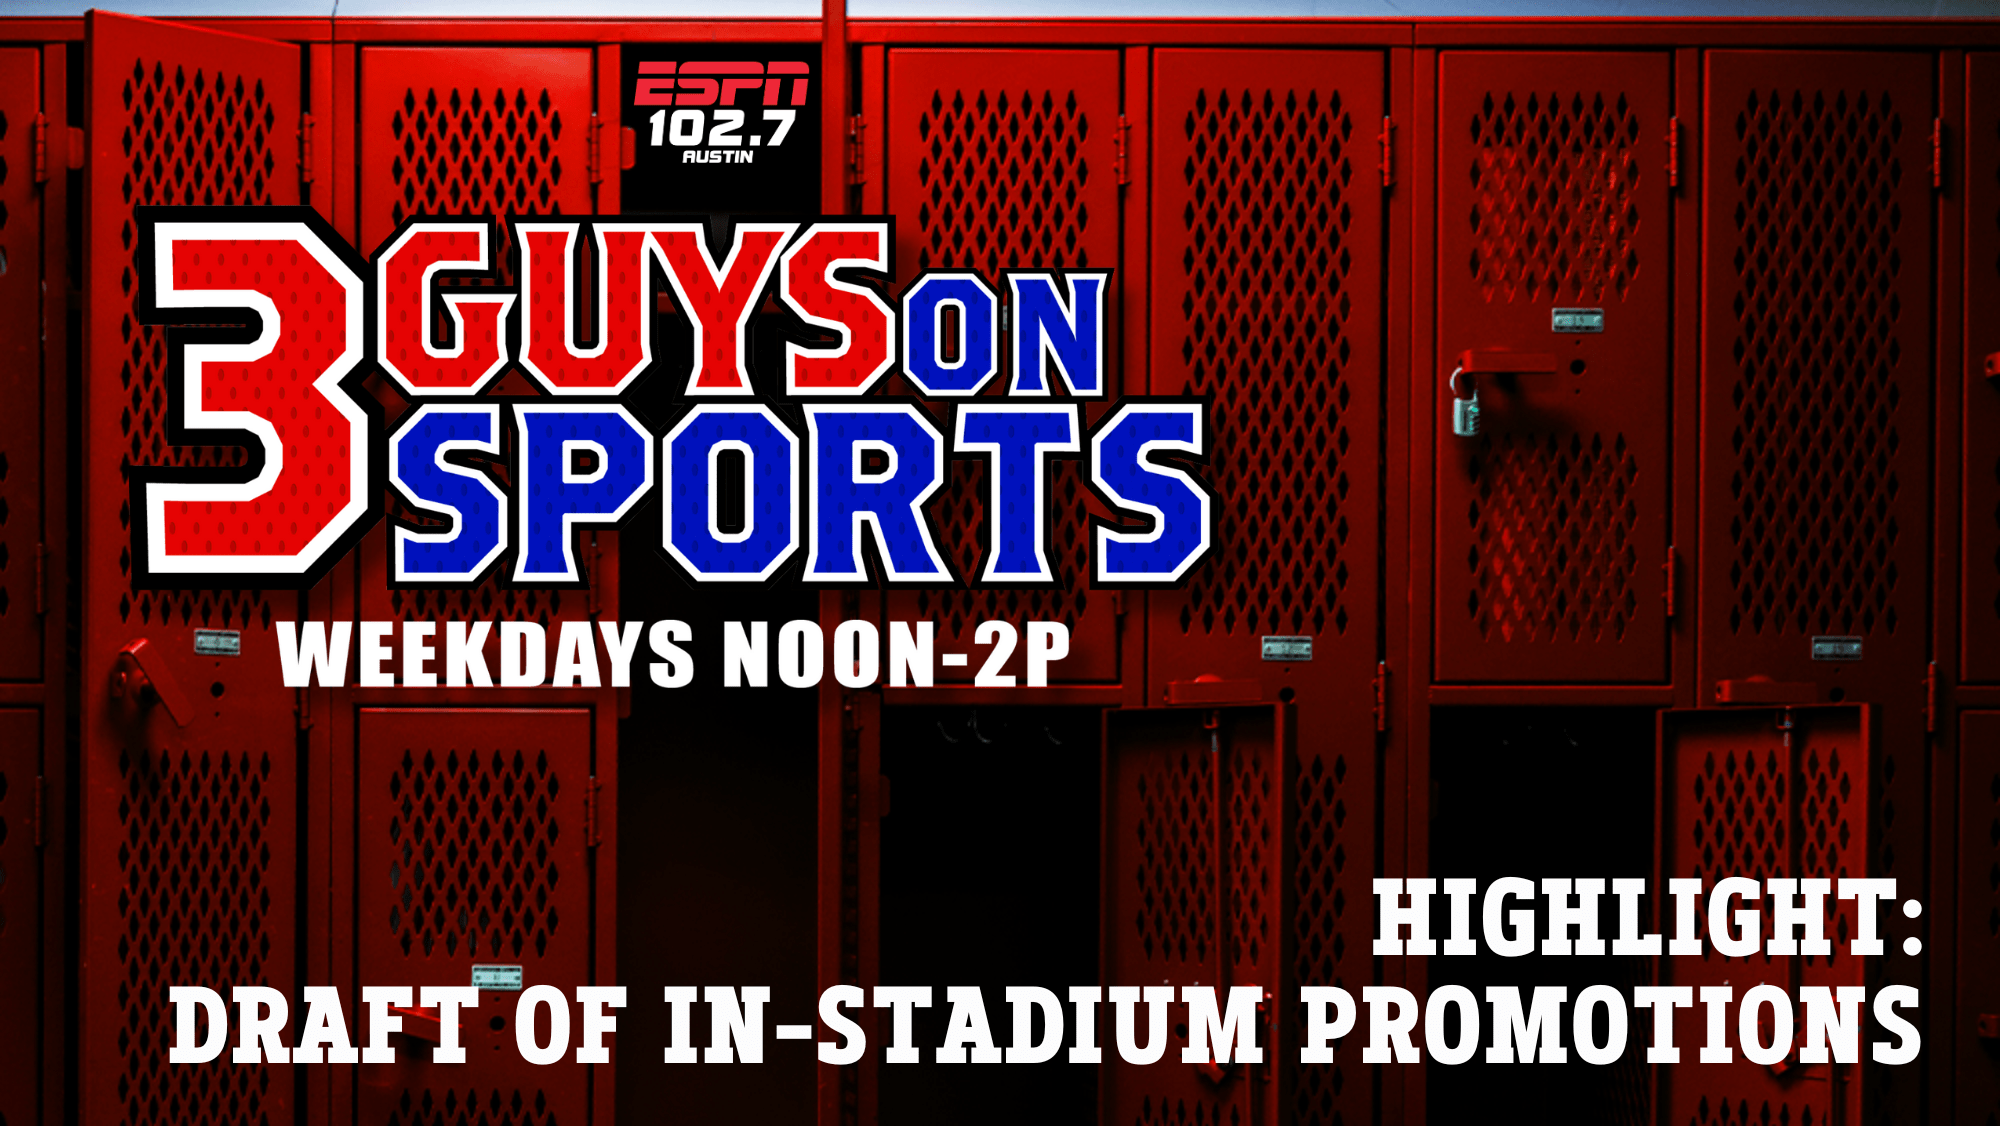 3 Guys on Sports Highlight: Draft of In-Stadium Promotions